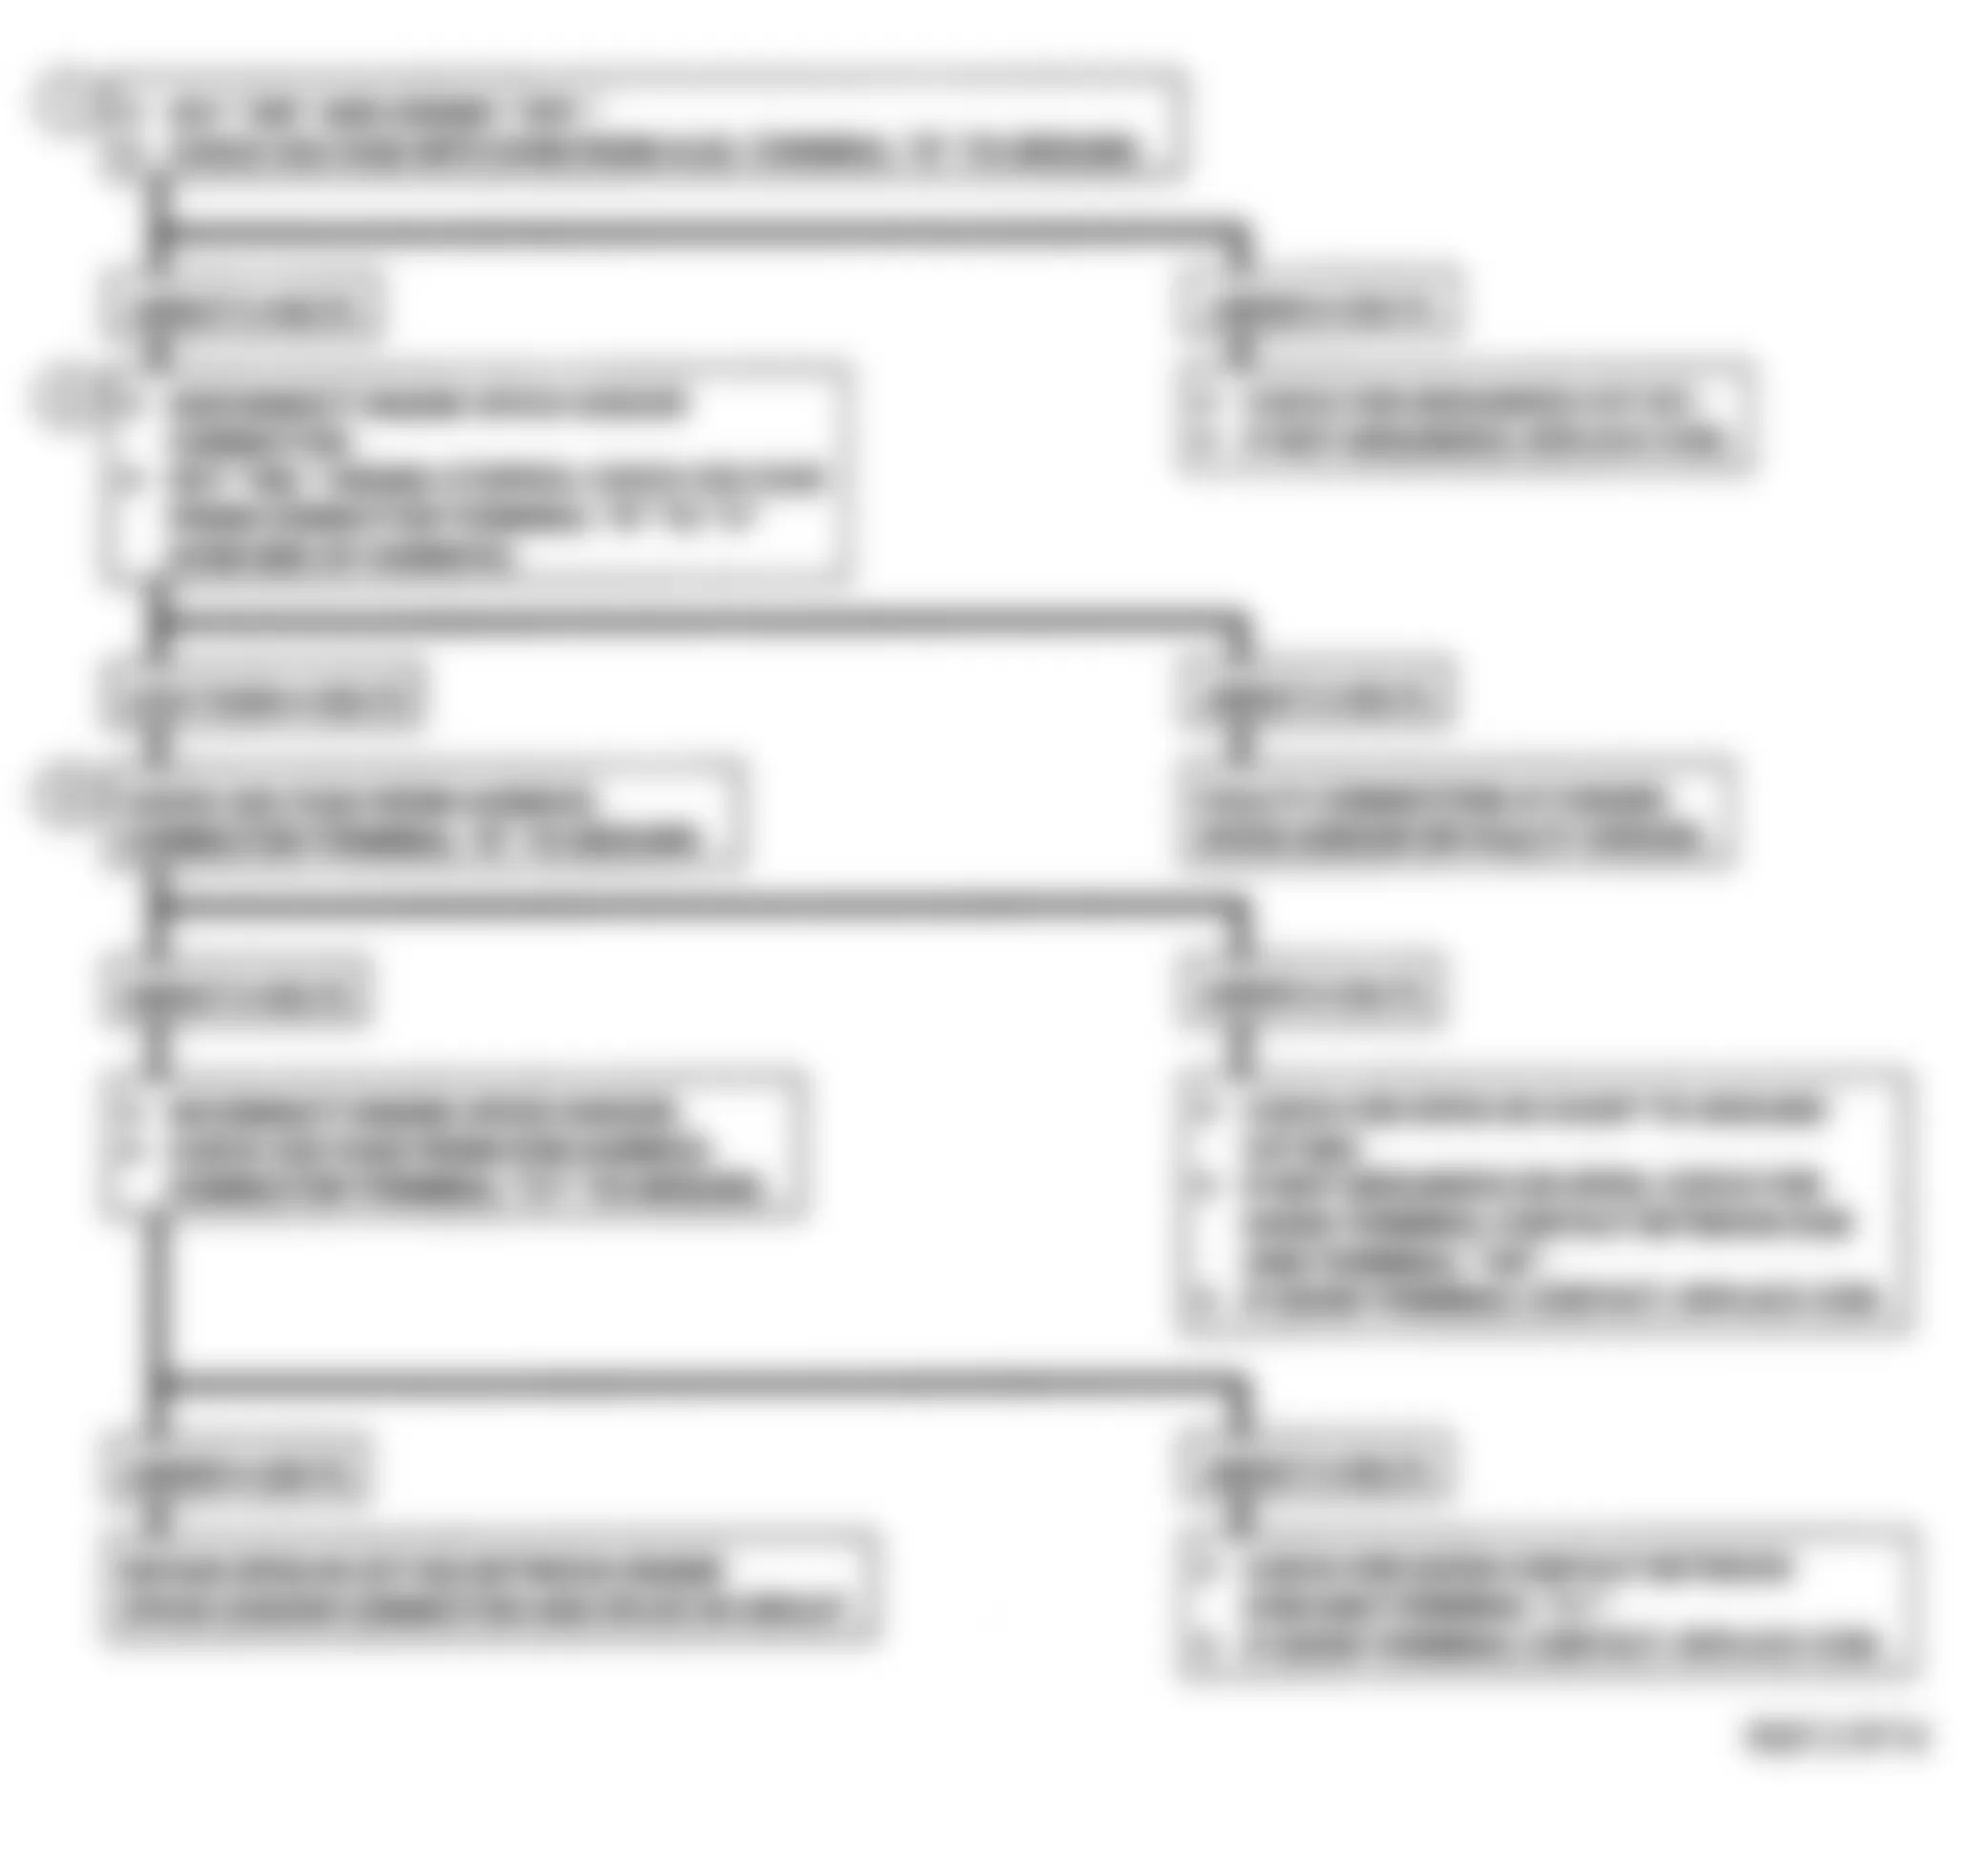 GMC Pickup C1500 1992 - Component Locations -  CODE 12, Flow Chart, No Reference Pulse